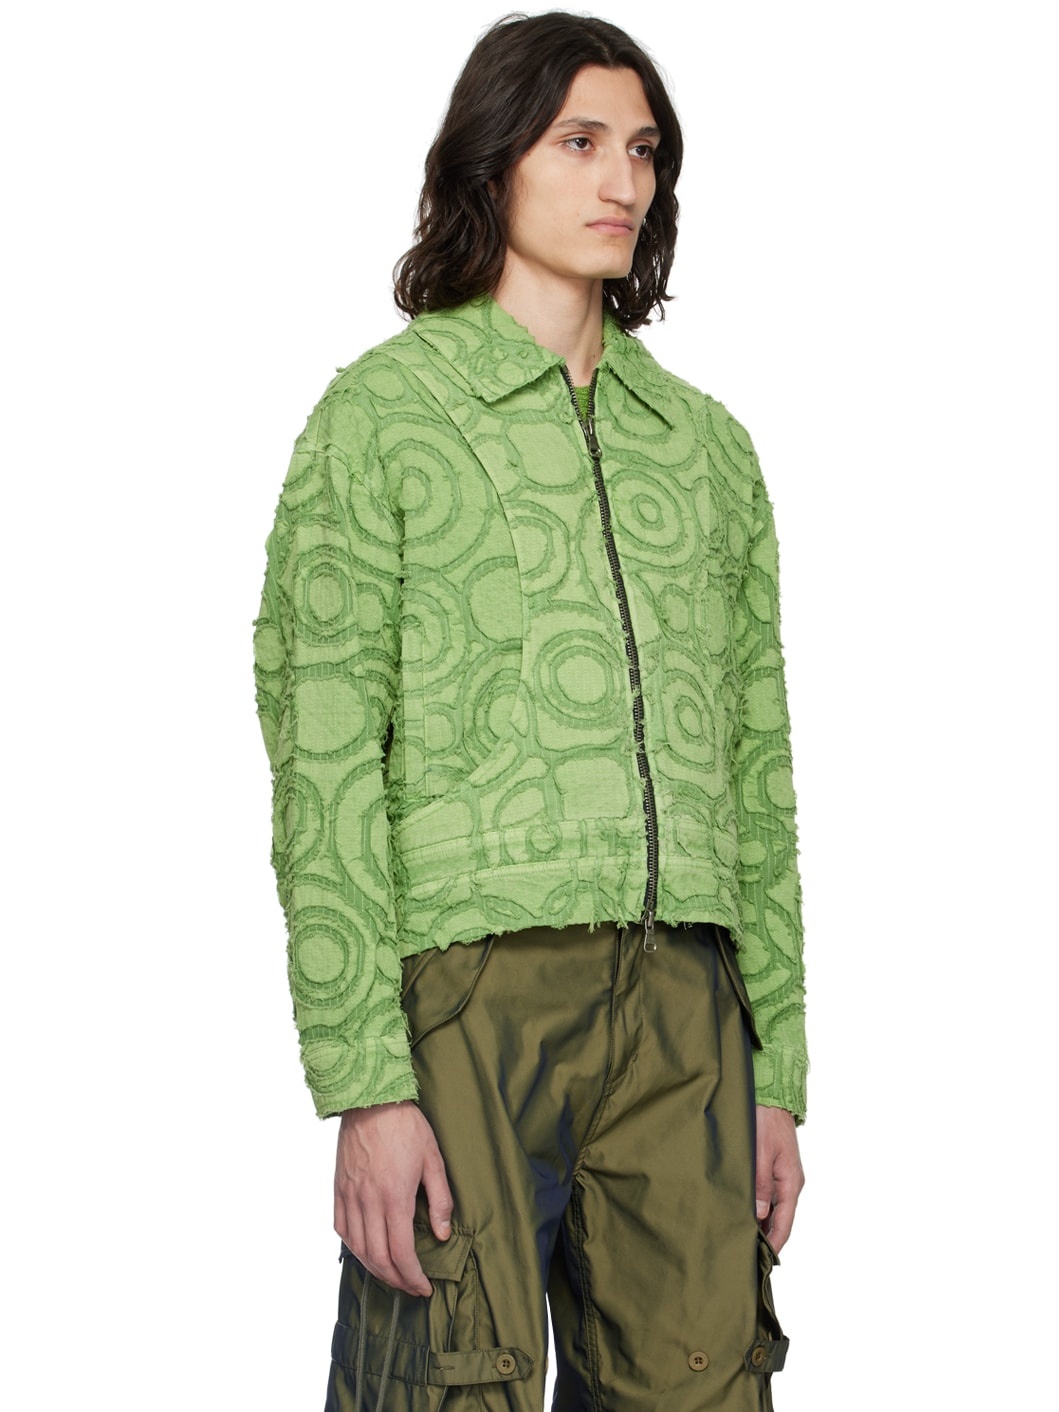 Green Burn Out Jacket - 2